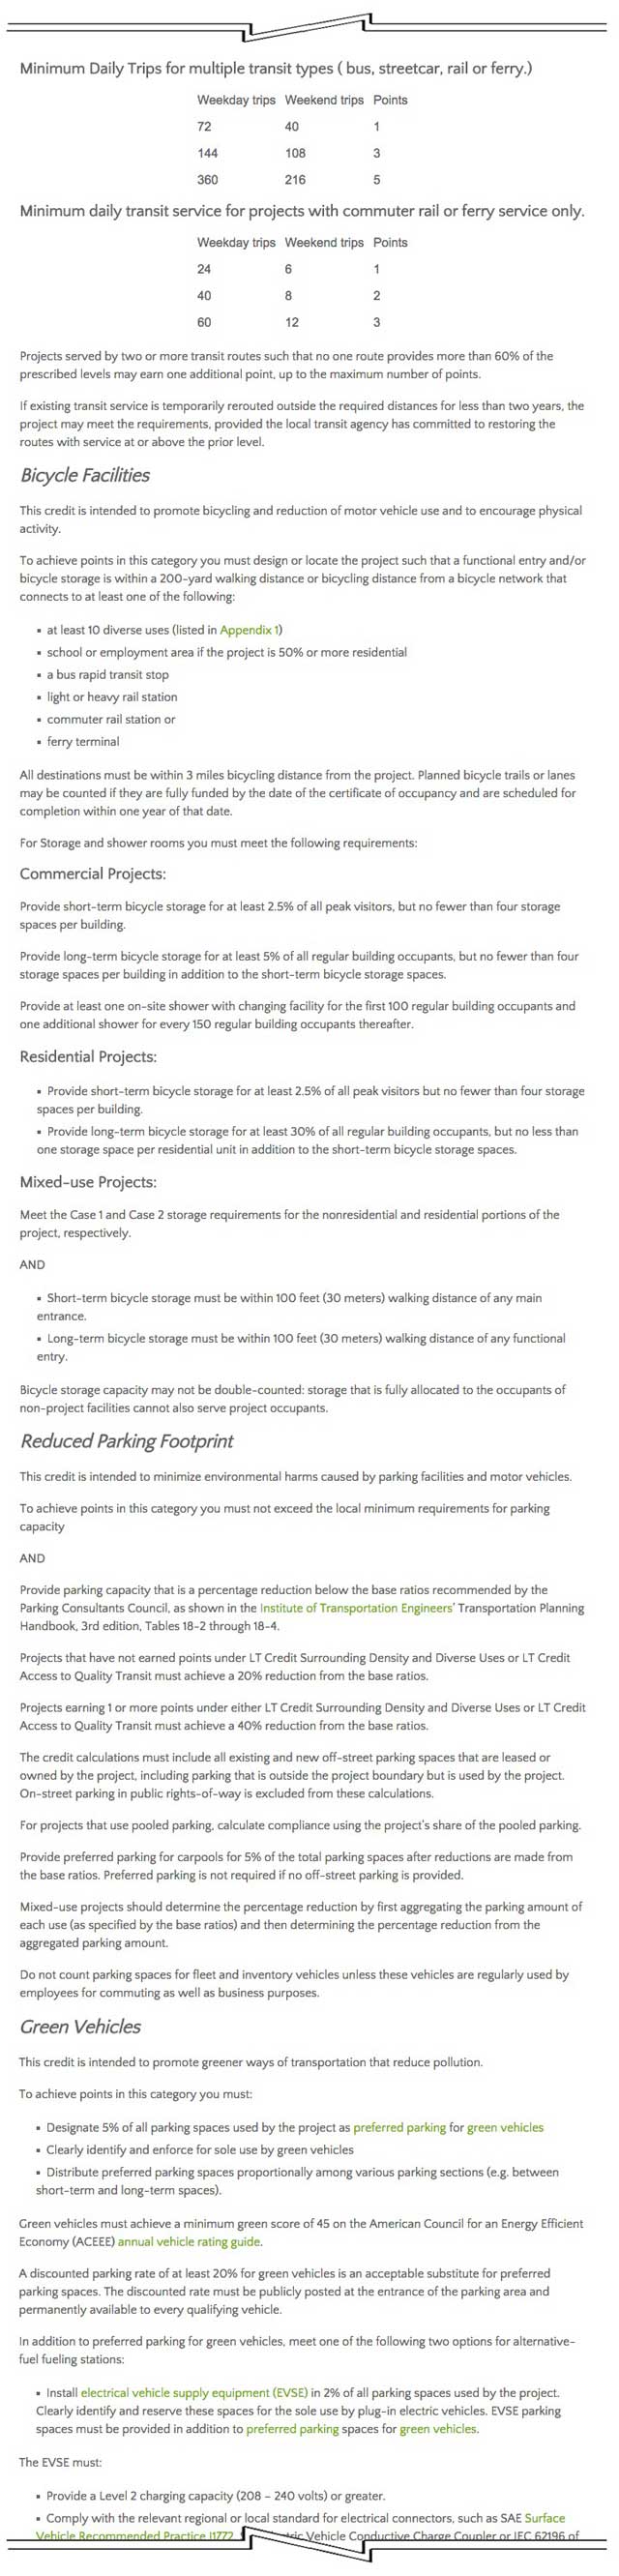 New-Paradigm Humanitarianism – Jacky Tustain (Project Manager) also continued helping us convert the LEED Certification research done by Matheus Manfredini (Civil Engineering Student and Urban Design Coordinator) into a webpage. Here are the 3rd round of pictures of this LEED Tutorial page developing on the site, continuing with formatting and content editing. We'd say we're about 40% complete with this tutorial.